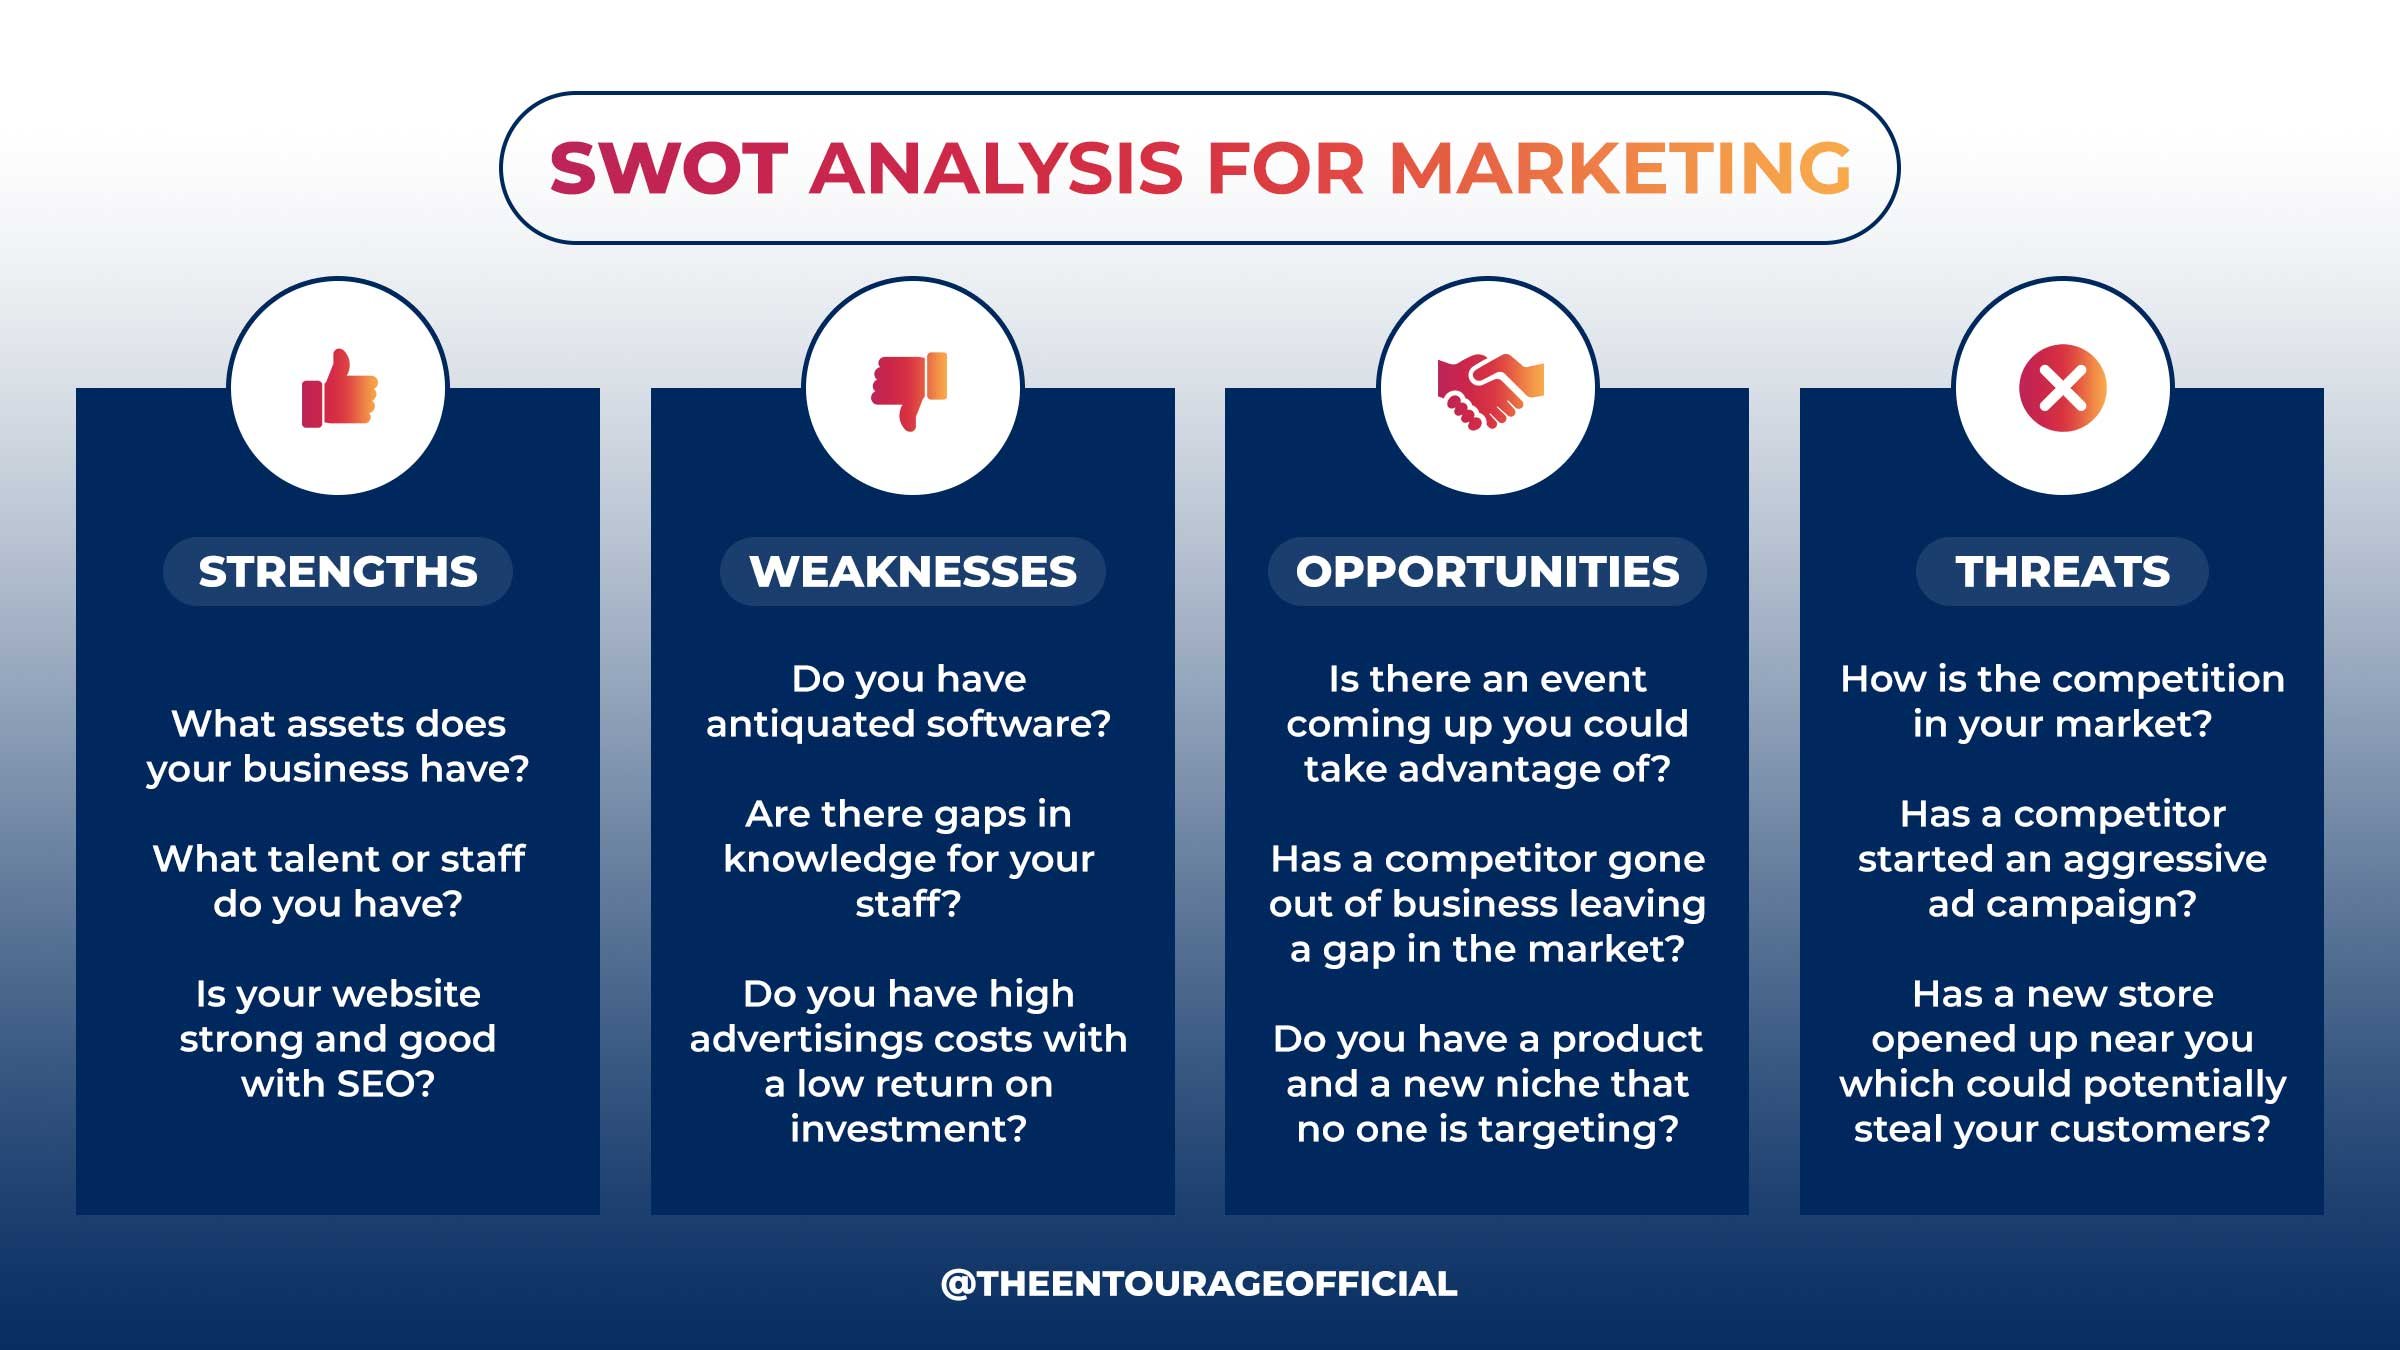 Swot anlysis for marketing - strengths, weaknesses, opportunities and threats - questions to ask